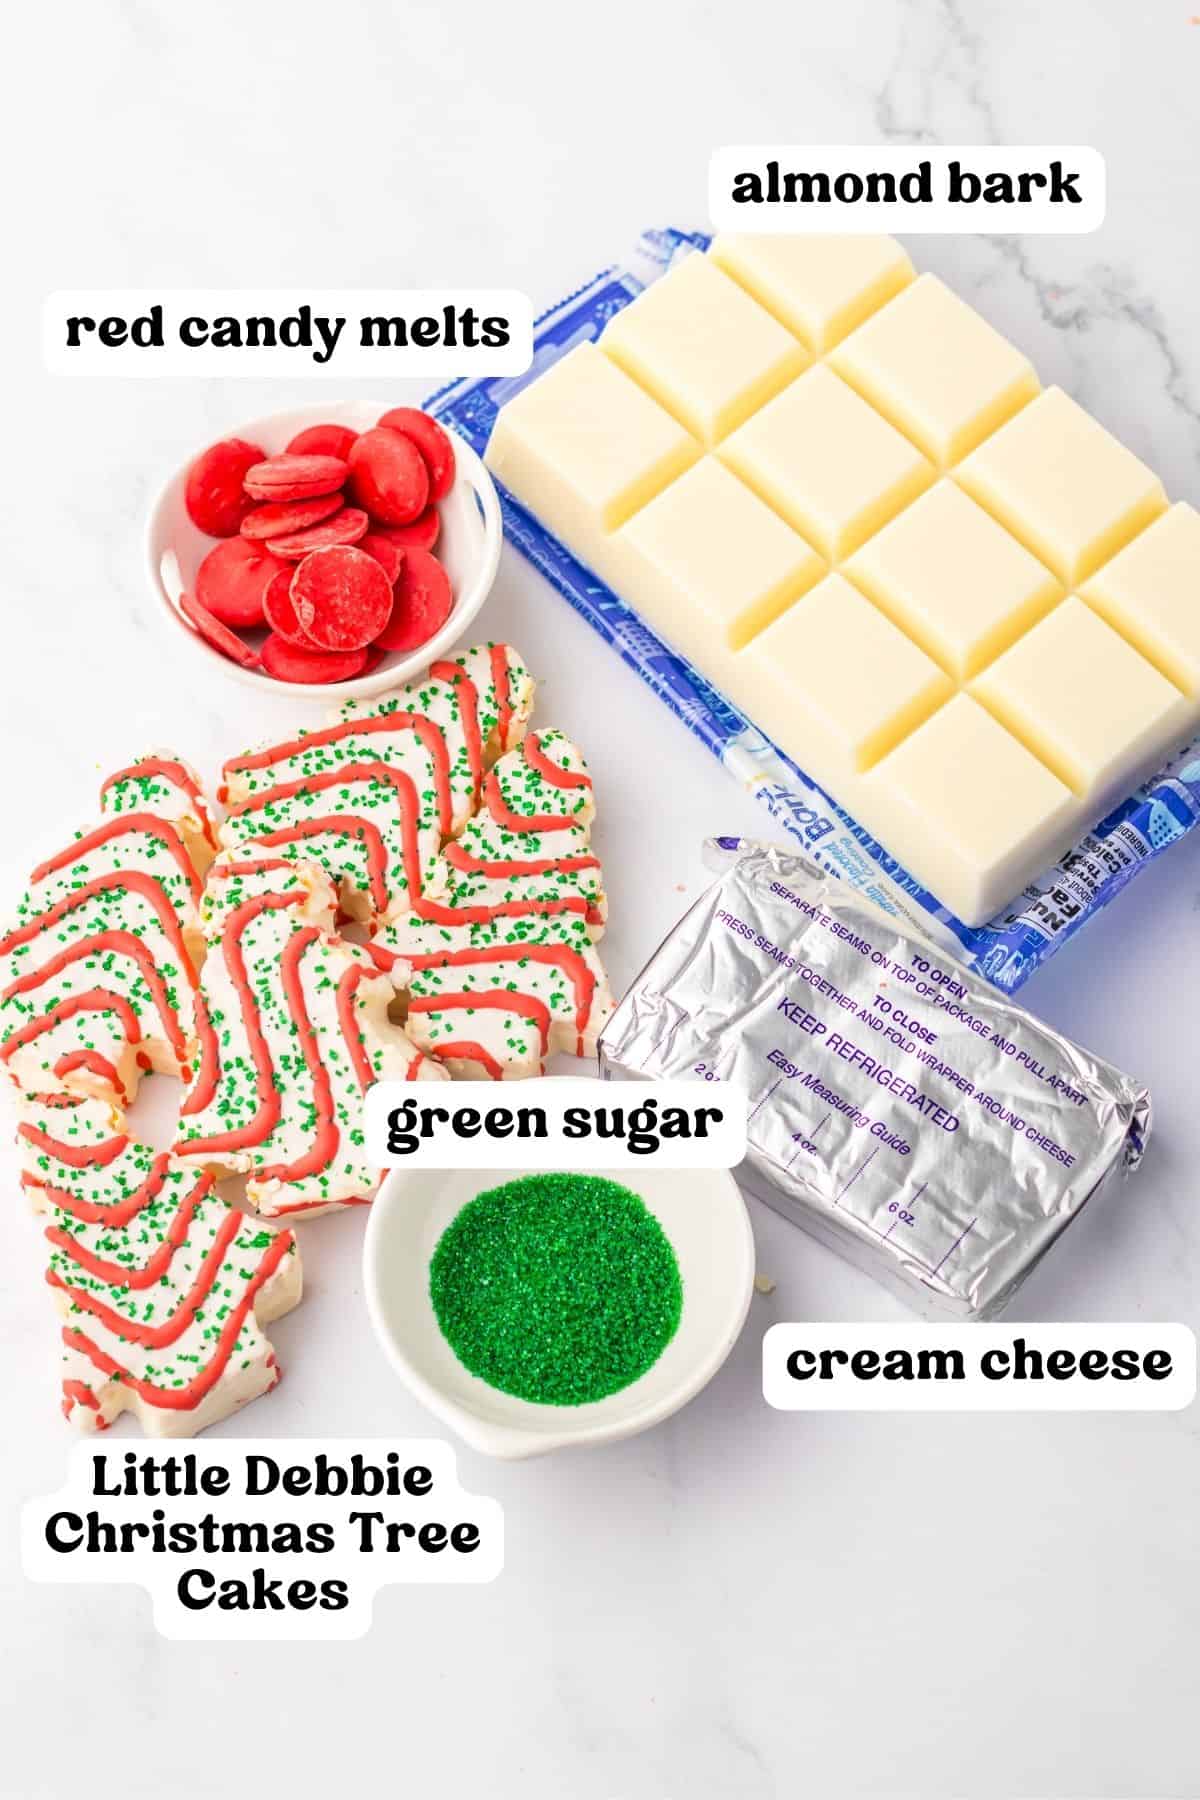 Red candy melts, white almond bark, green sugar, cream cheese, and Little Debbie Christmas Tree Cakes.